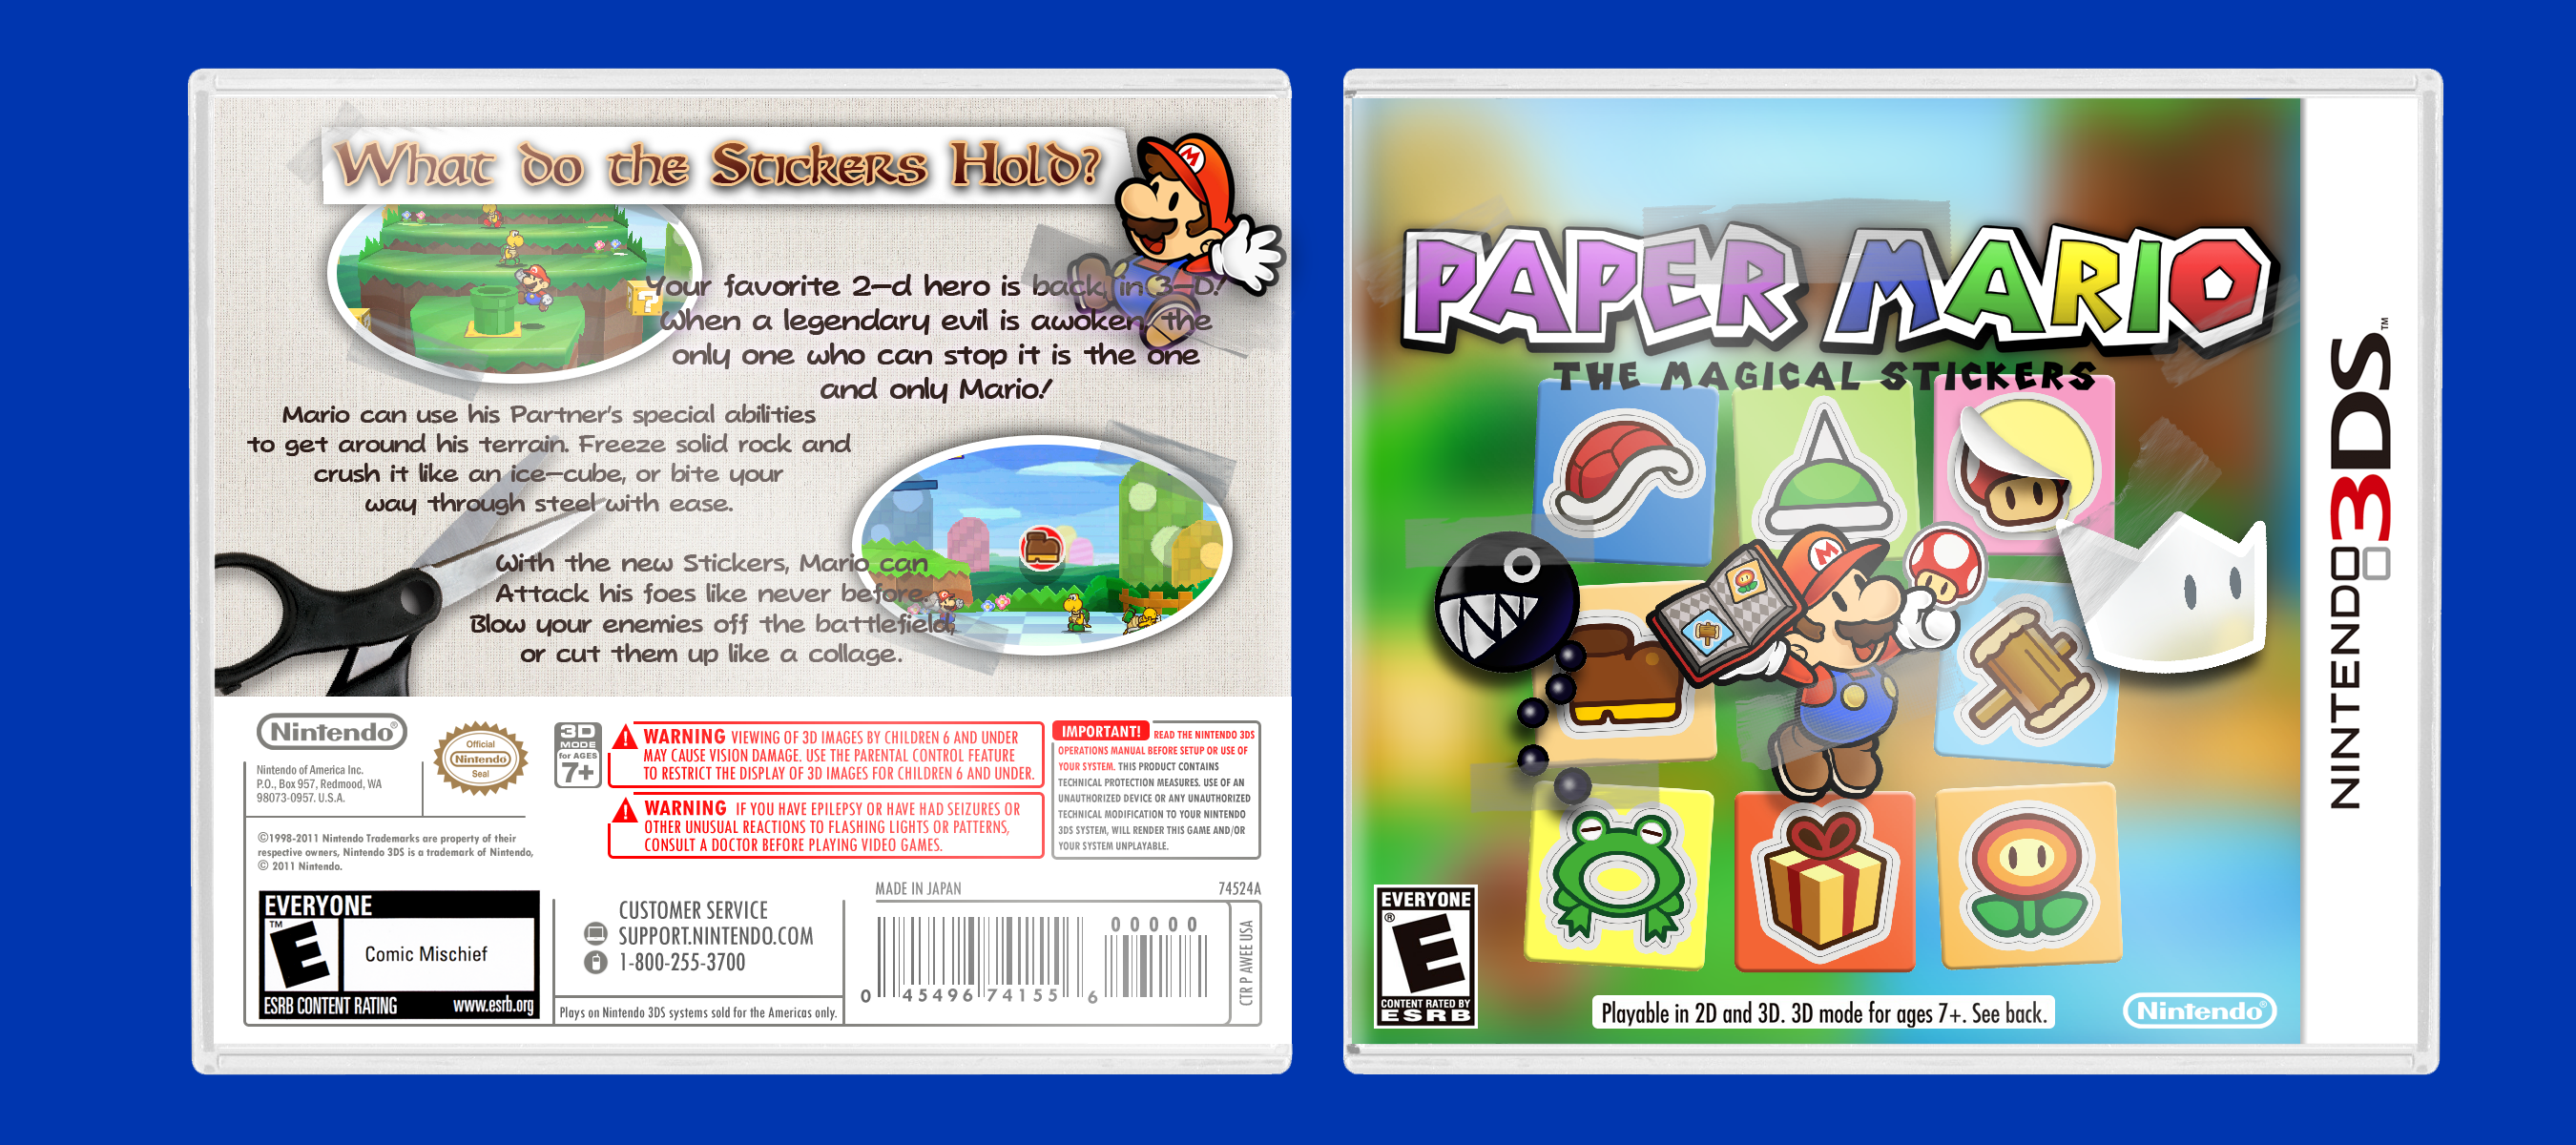 Paper Mario 3D - The Magical Stickers box cover